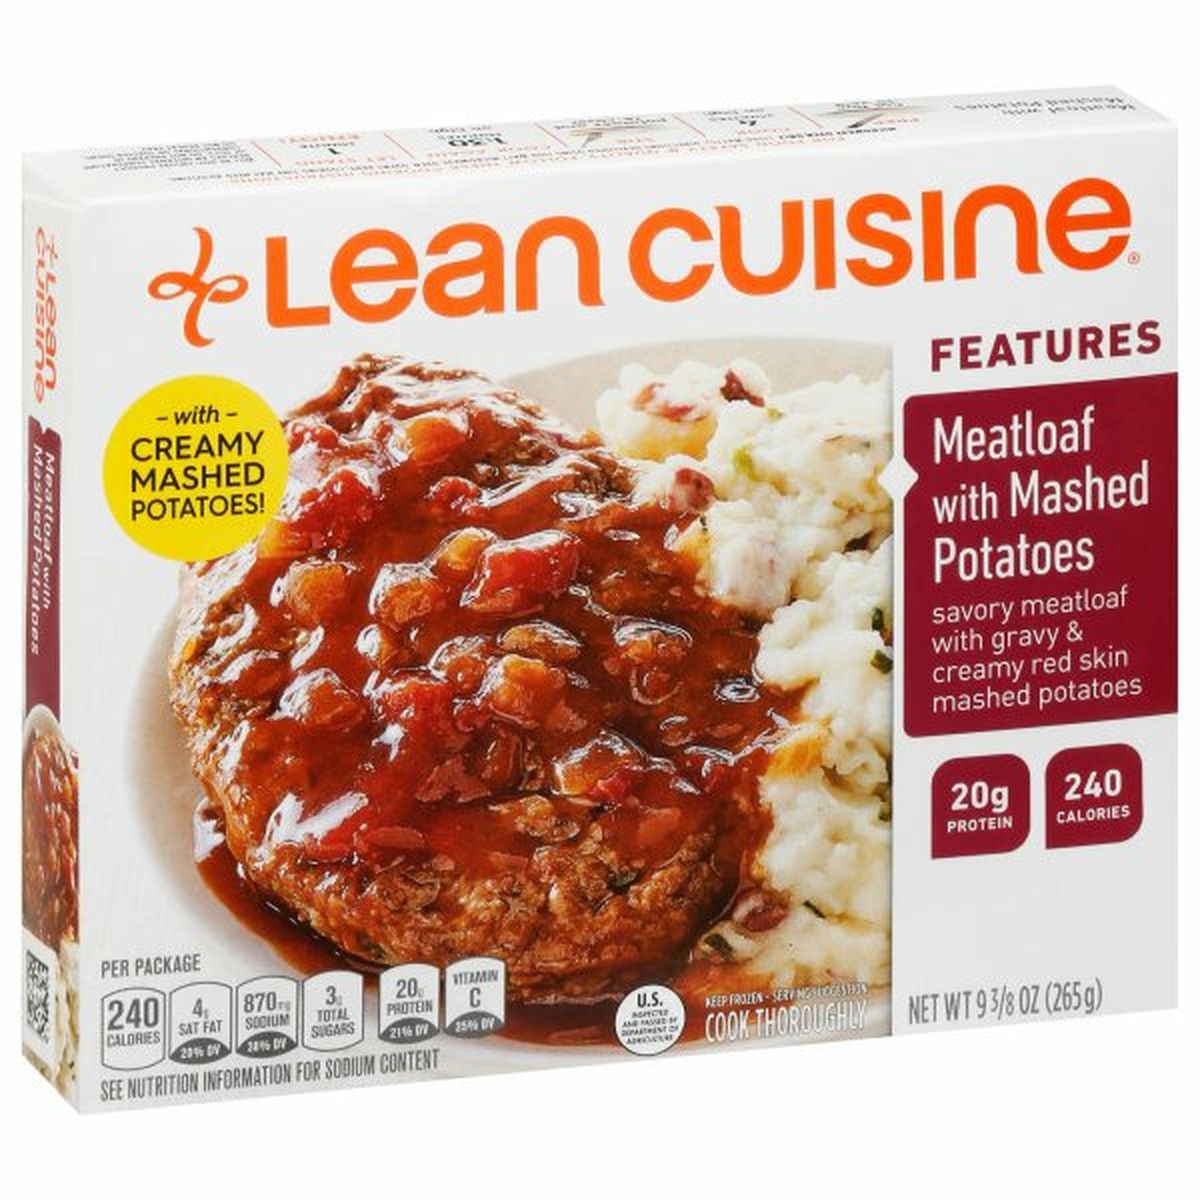 Calories in LEAN CUISINE Meatloaf with Mashed Potatoes